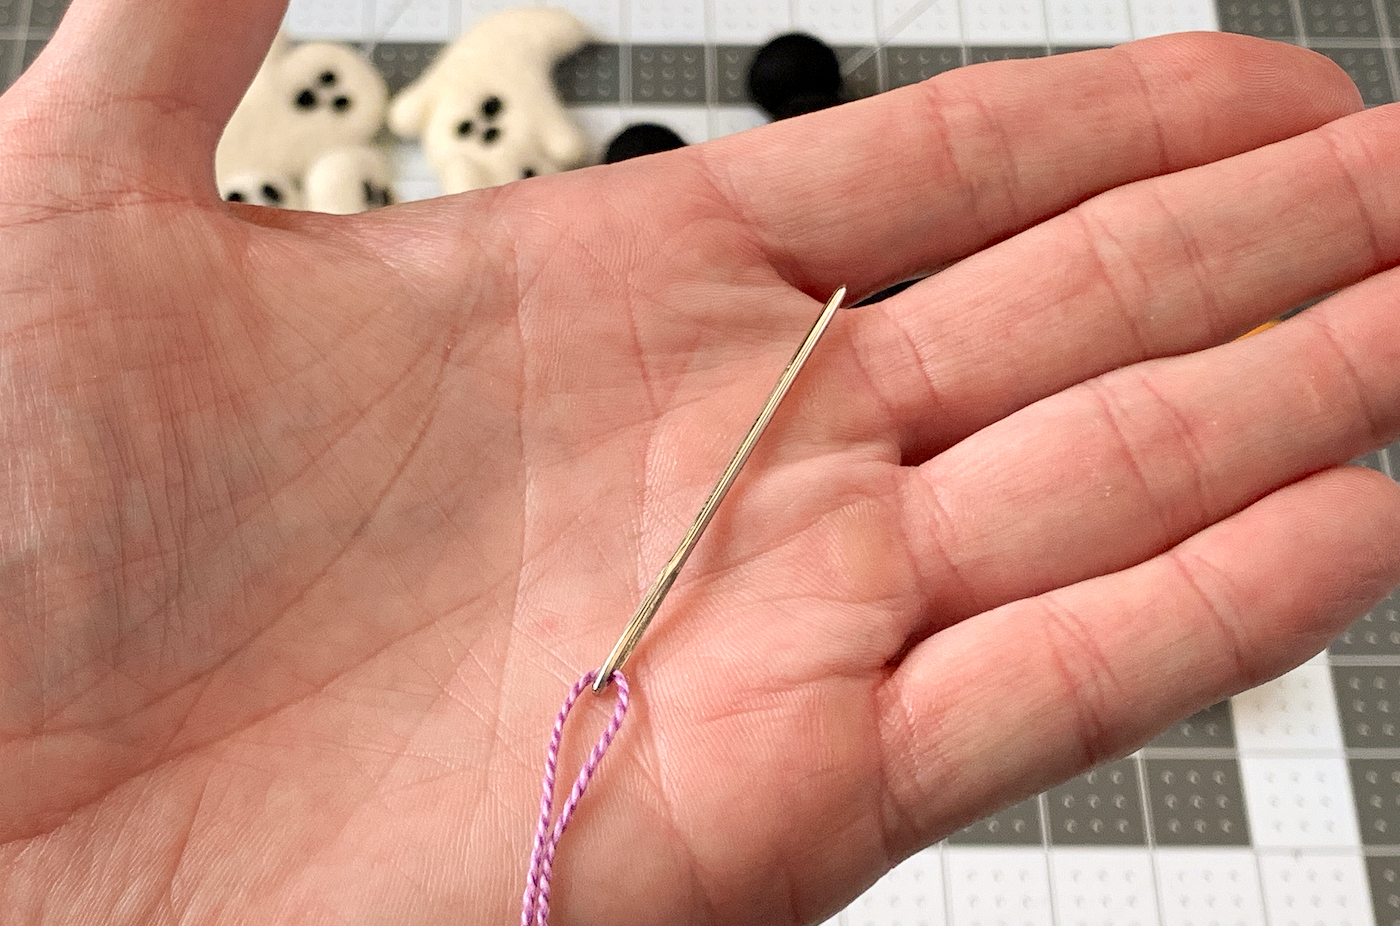 Hand holding a needle flossed with purple thread